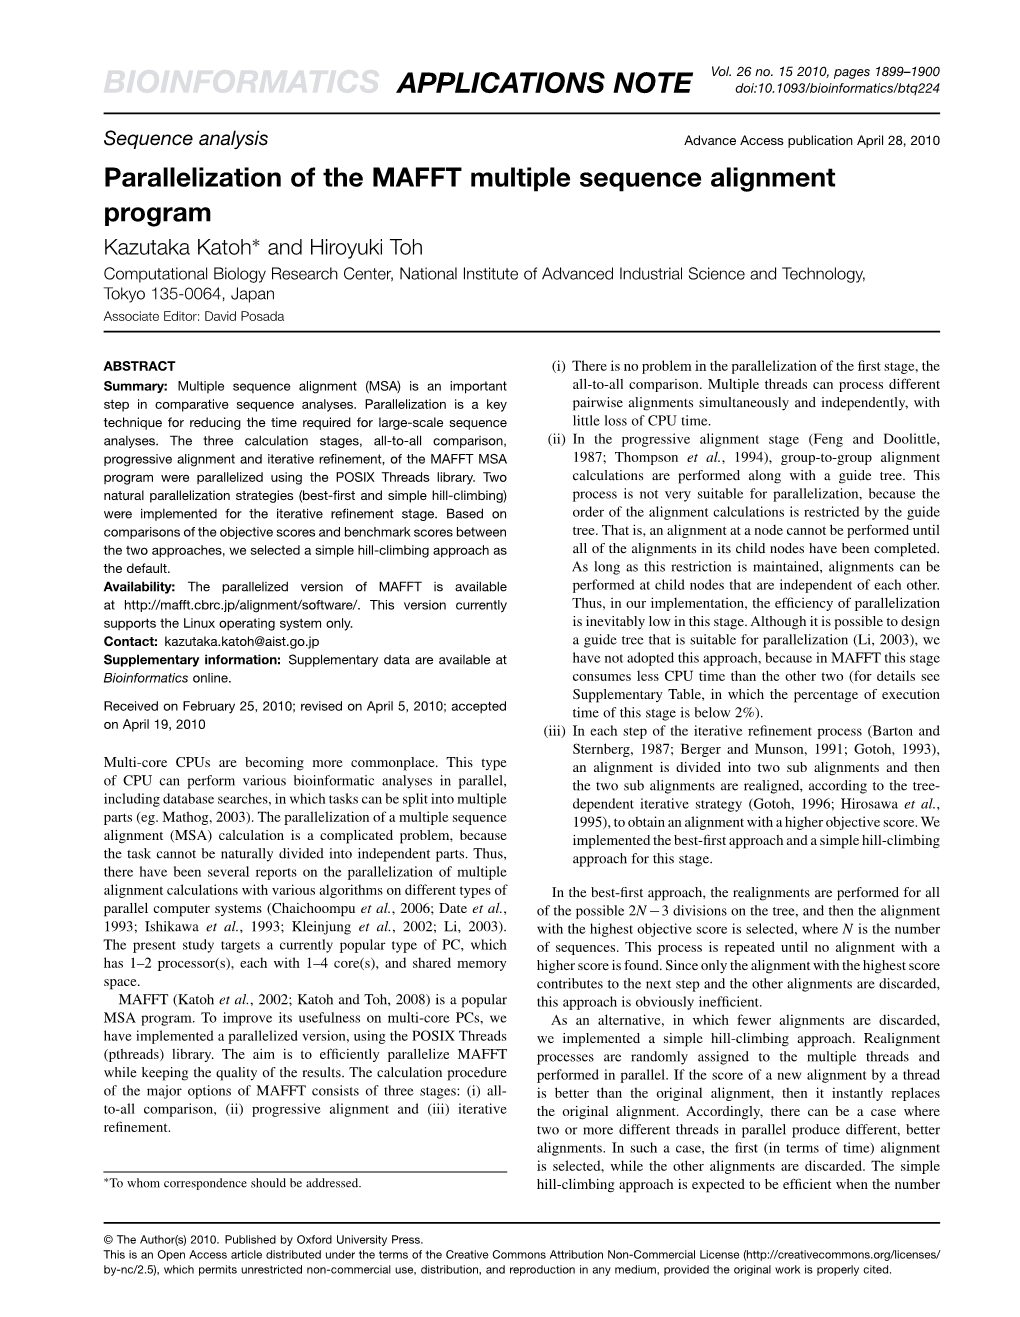 Parallelization of the MAFFT Multiple Sequence Alignment